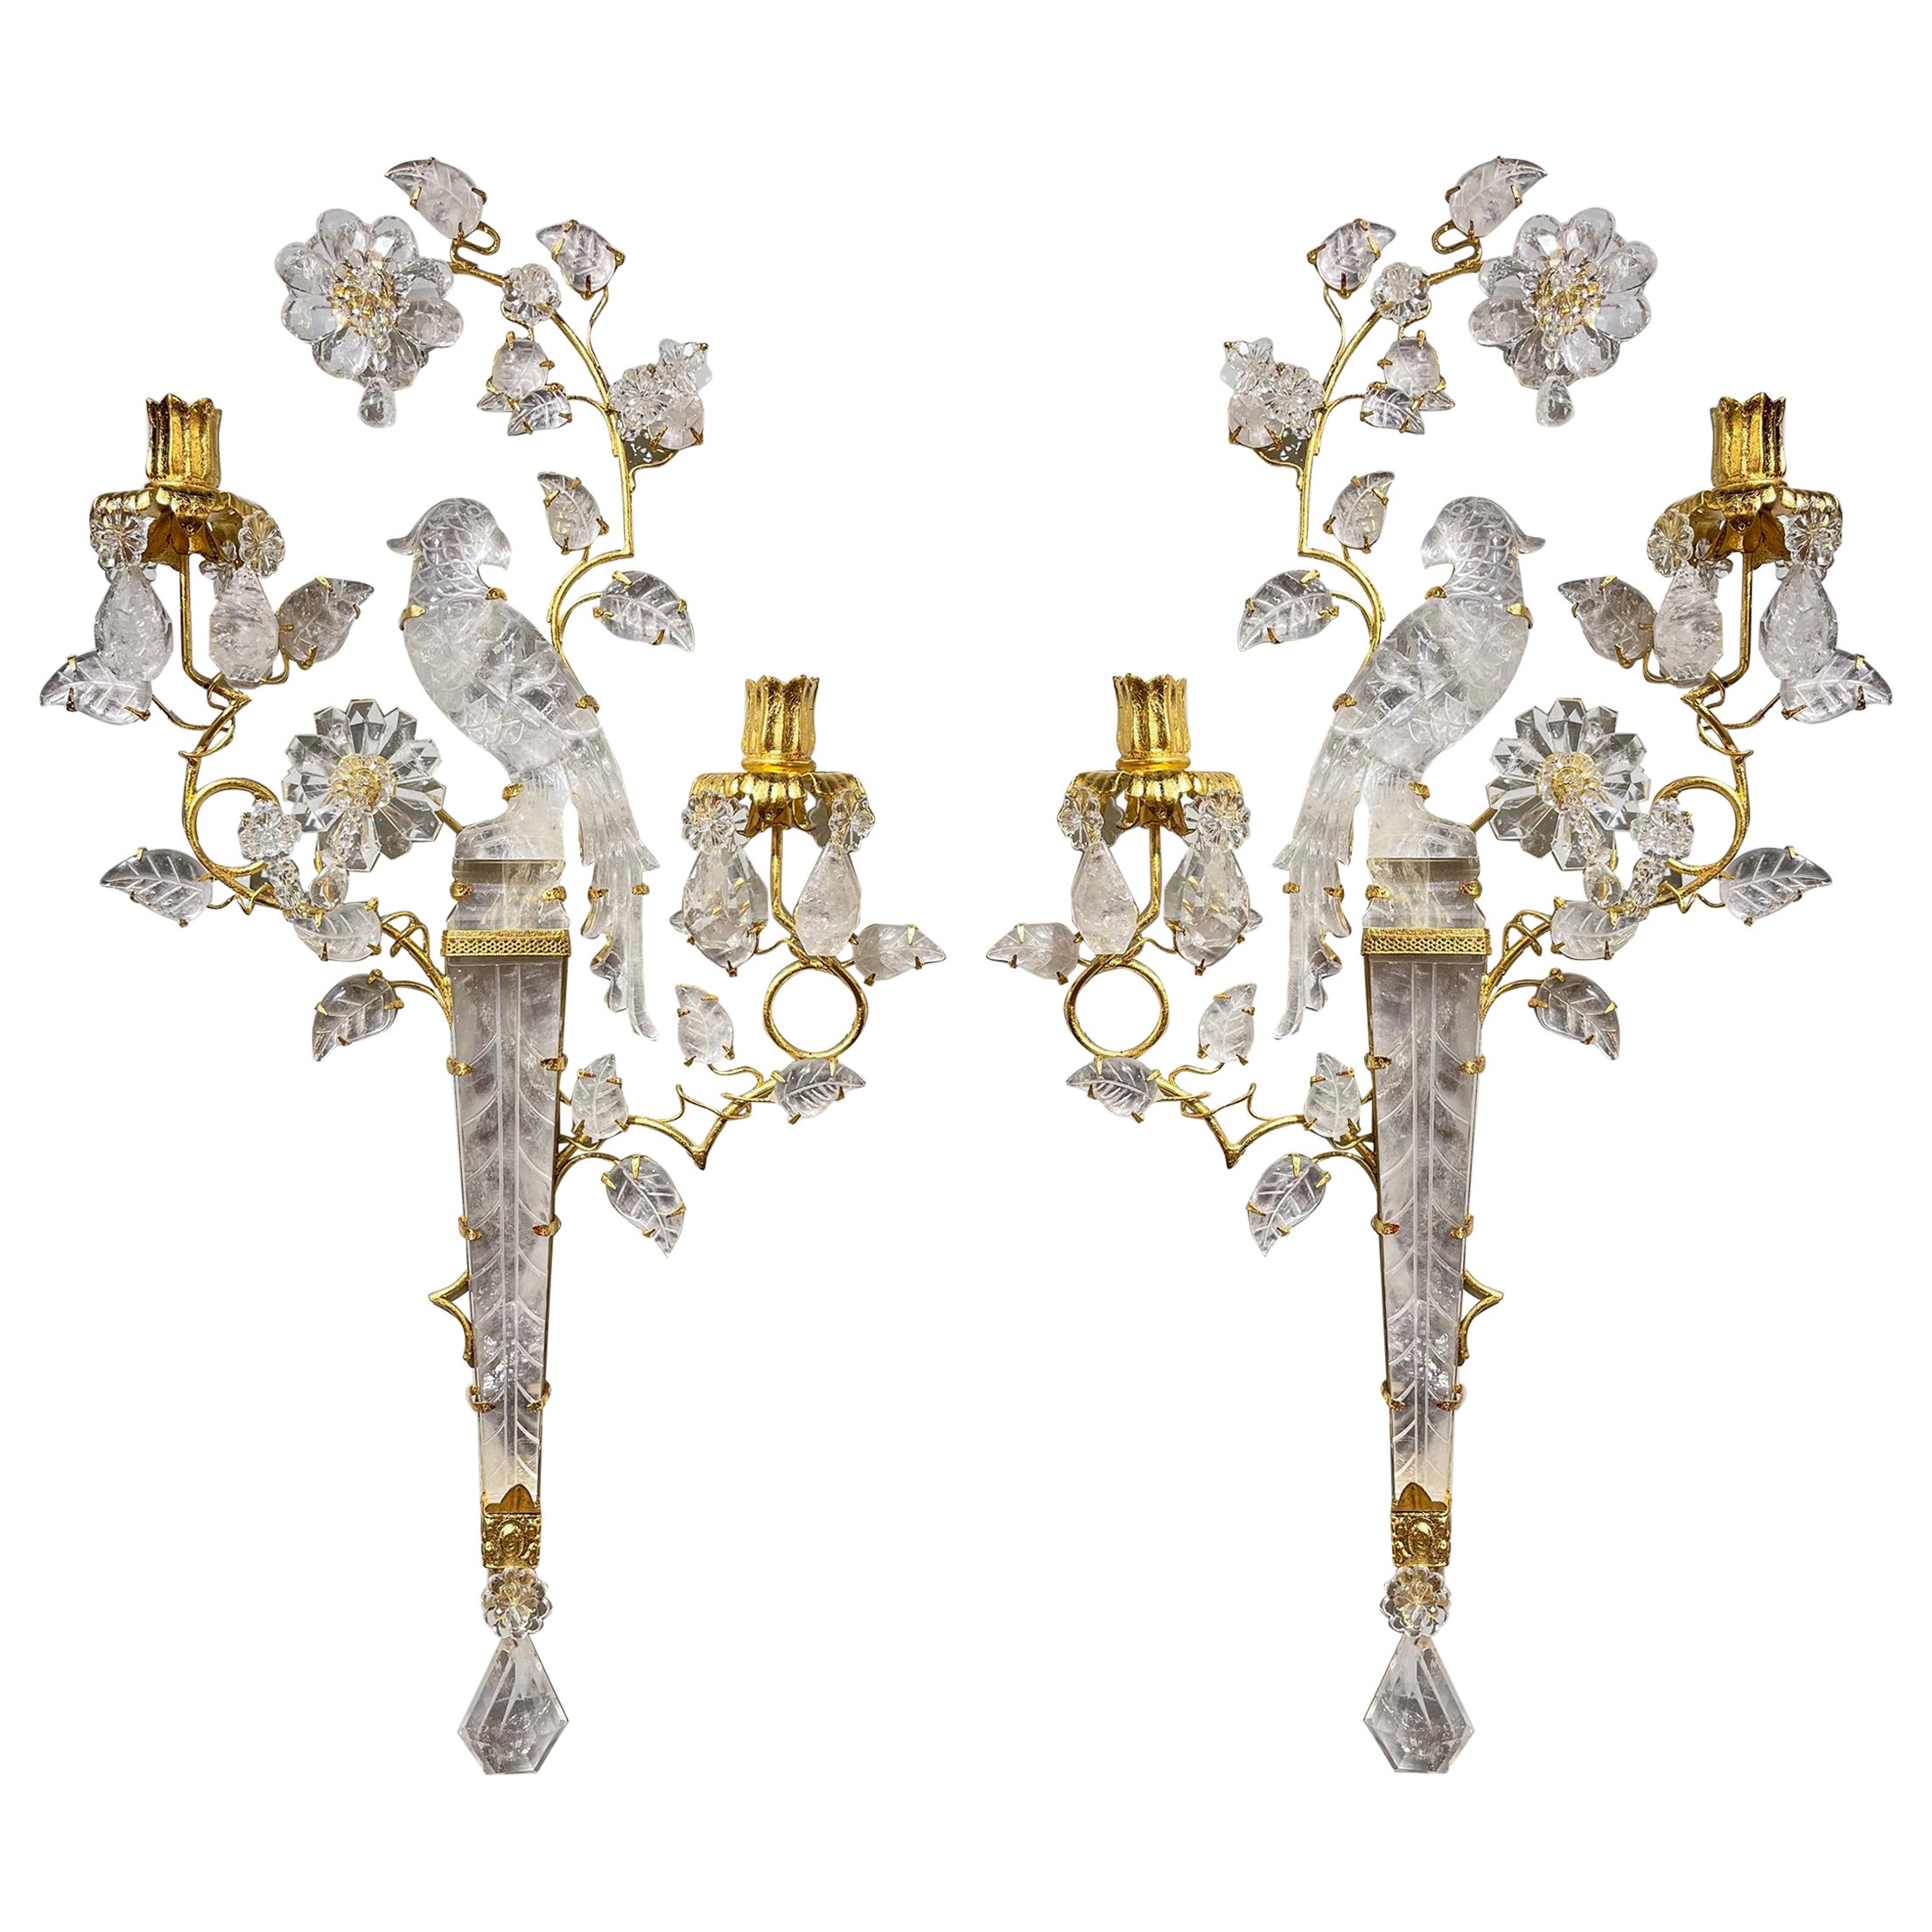 Pair of Rock Crystal Uccello Sconces 